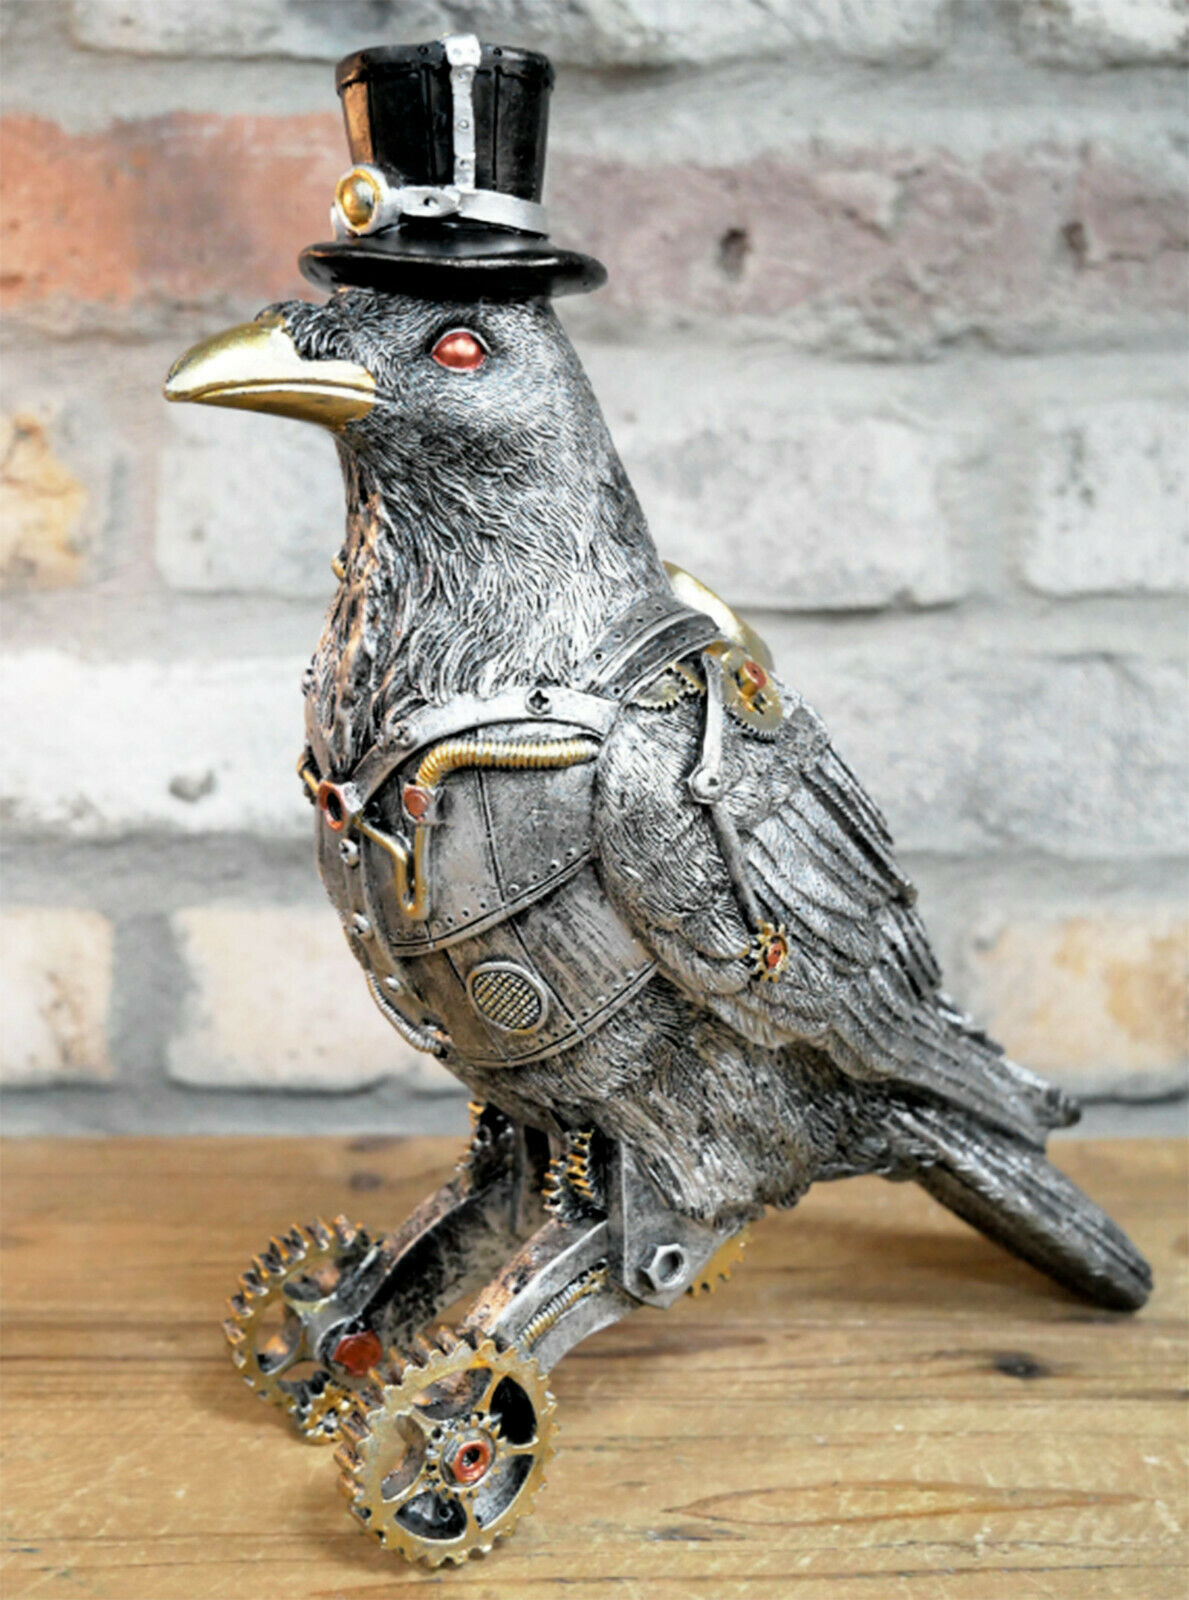 Steampunk Bird Ornament Freestanding Industrial Style Crow With Top Hat